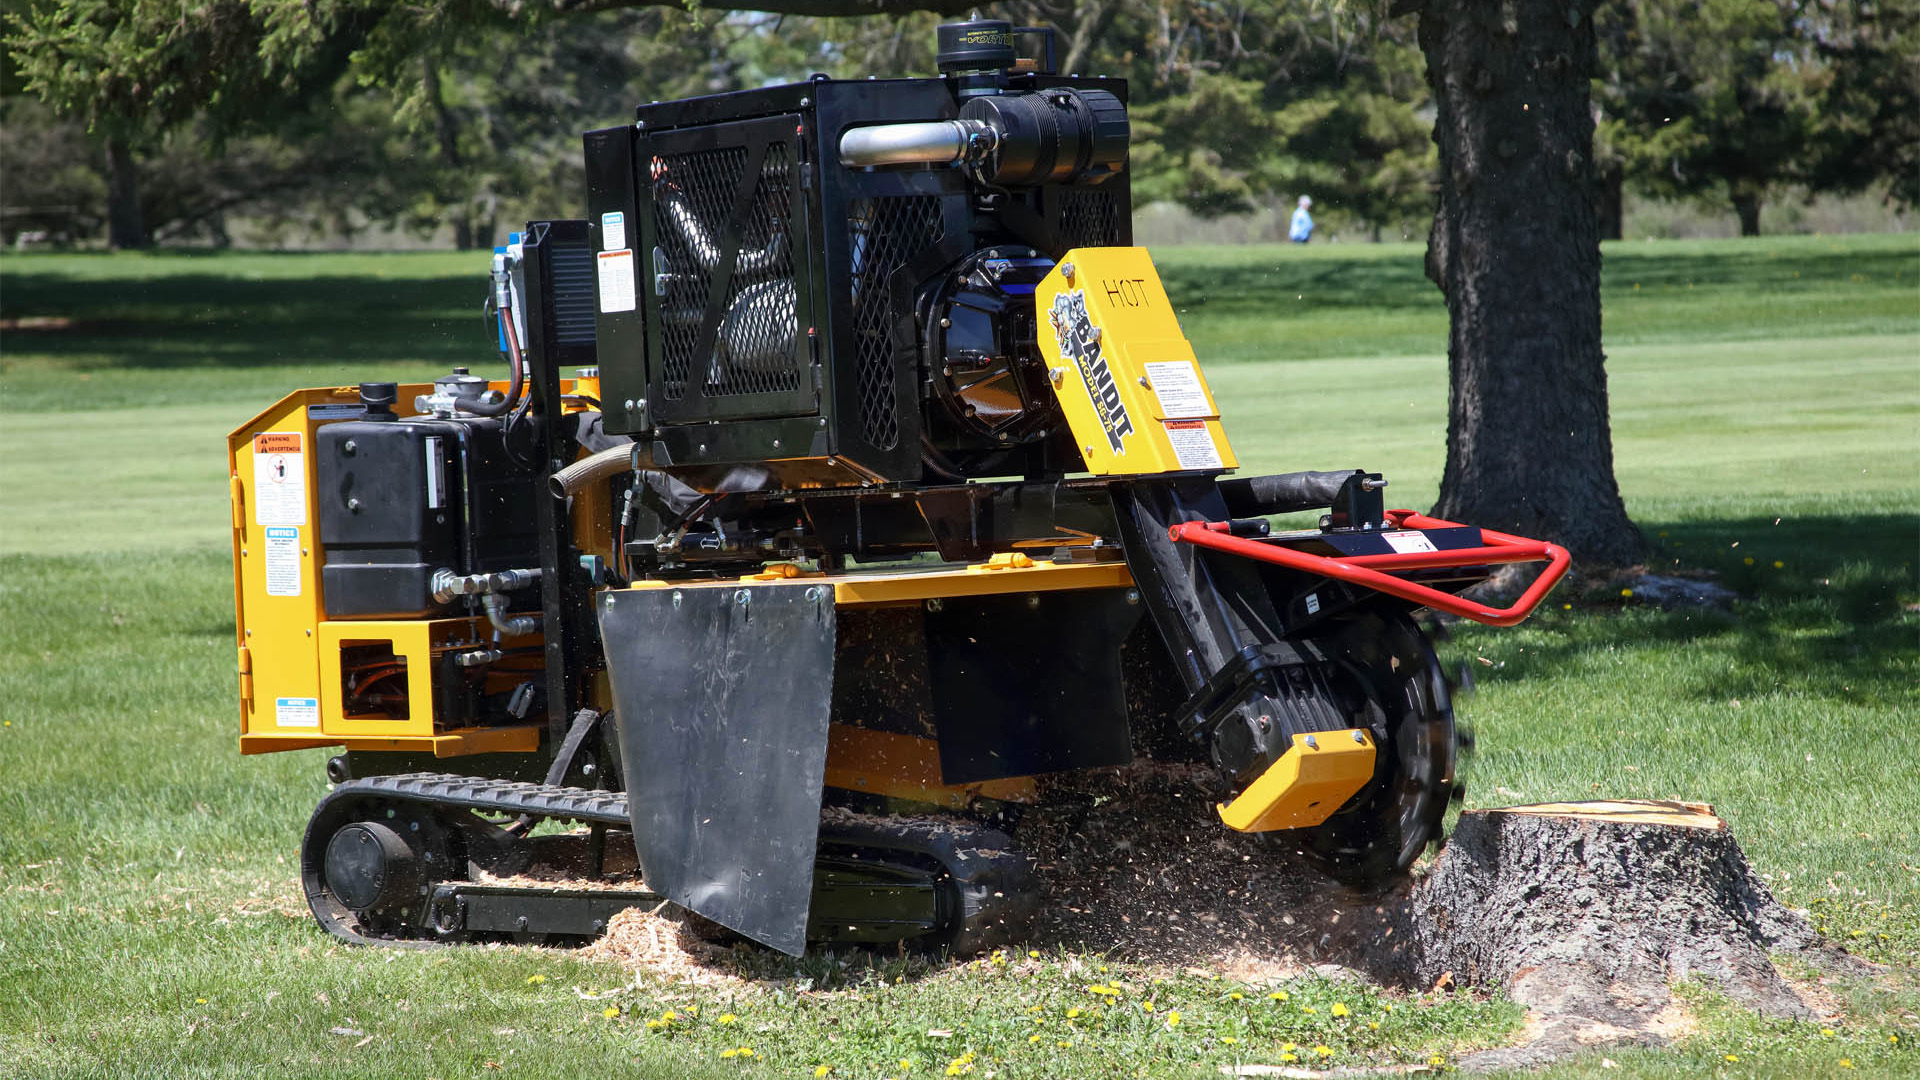 Bandit Stump Grinder SG-75 from Iron Source in Delaware